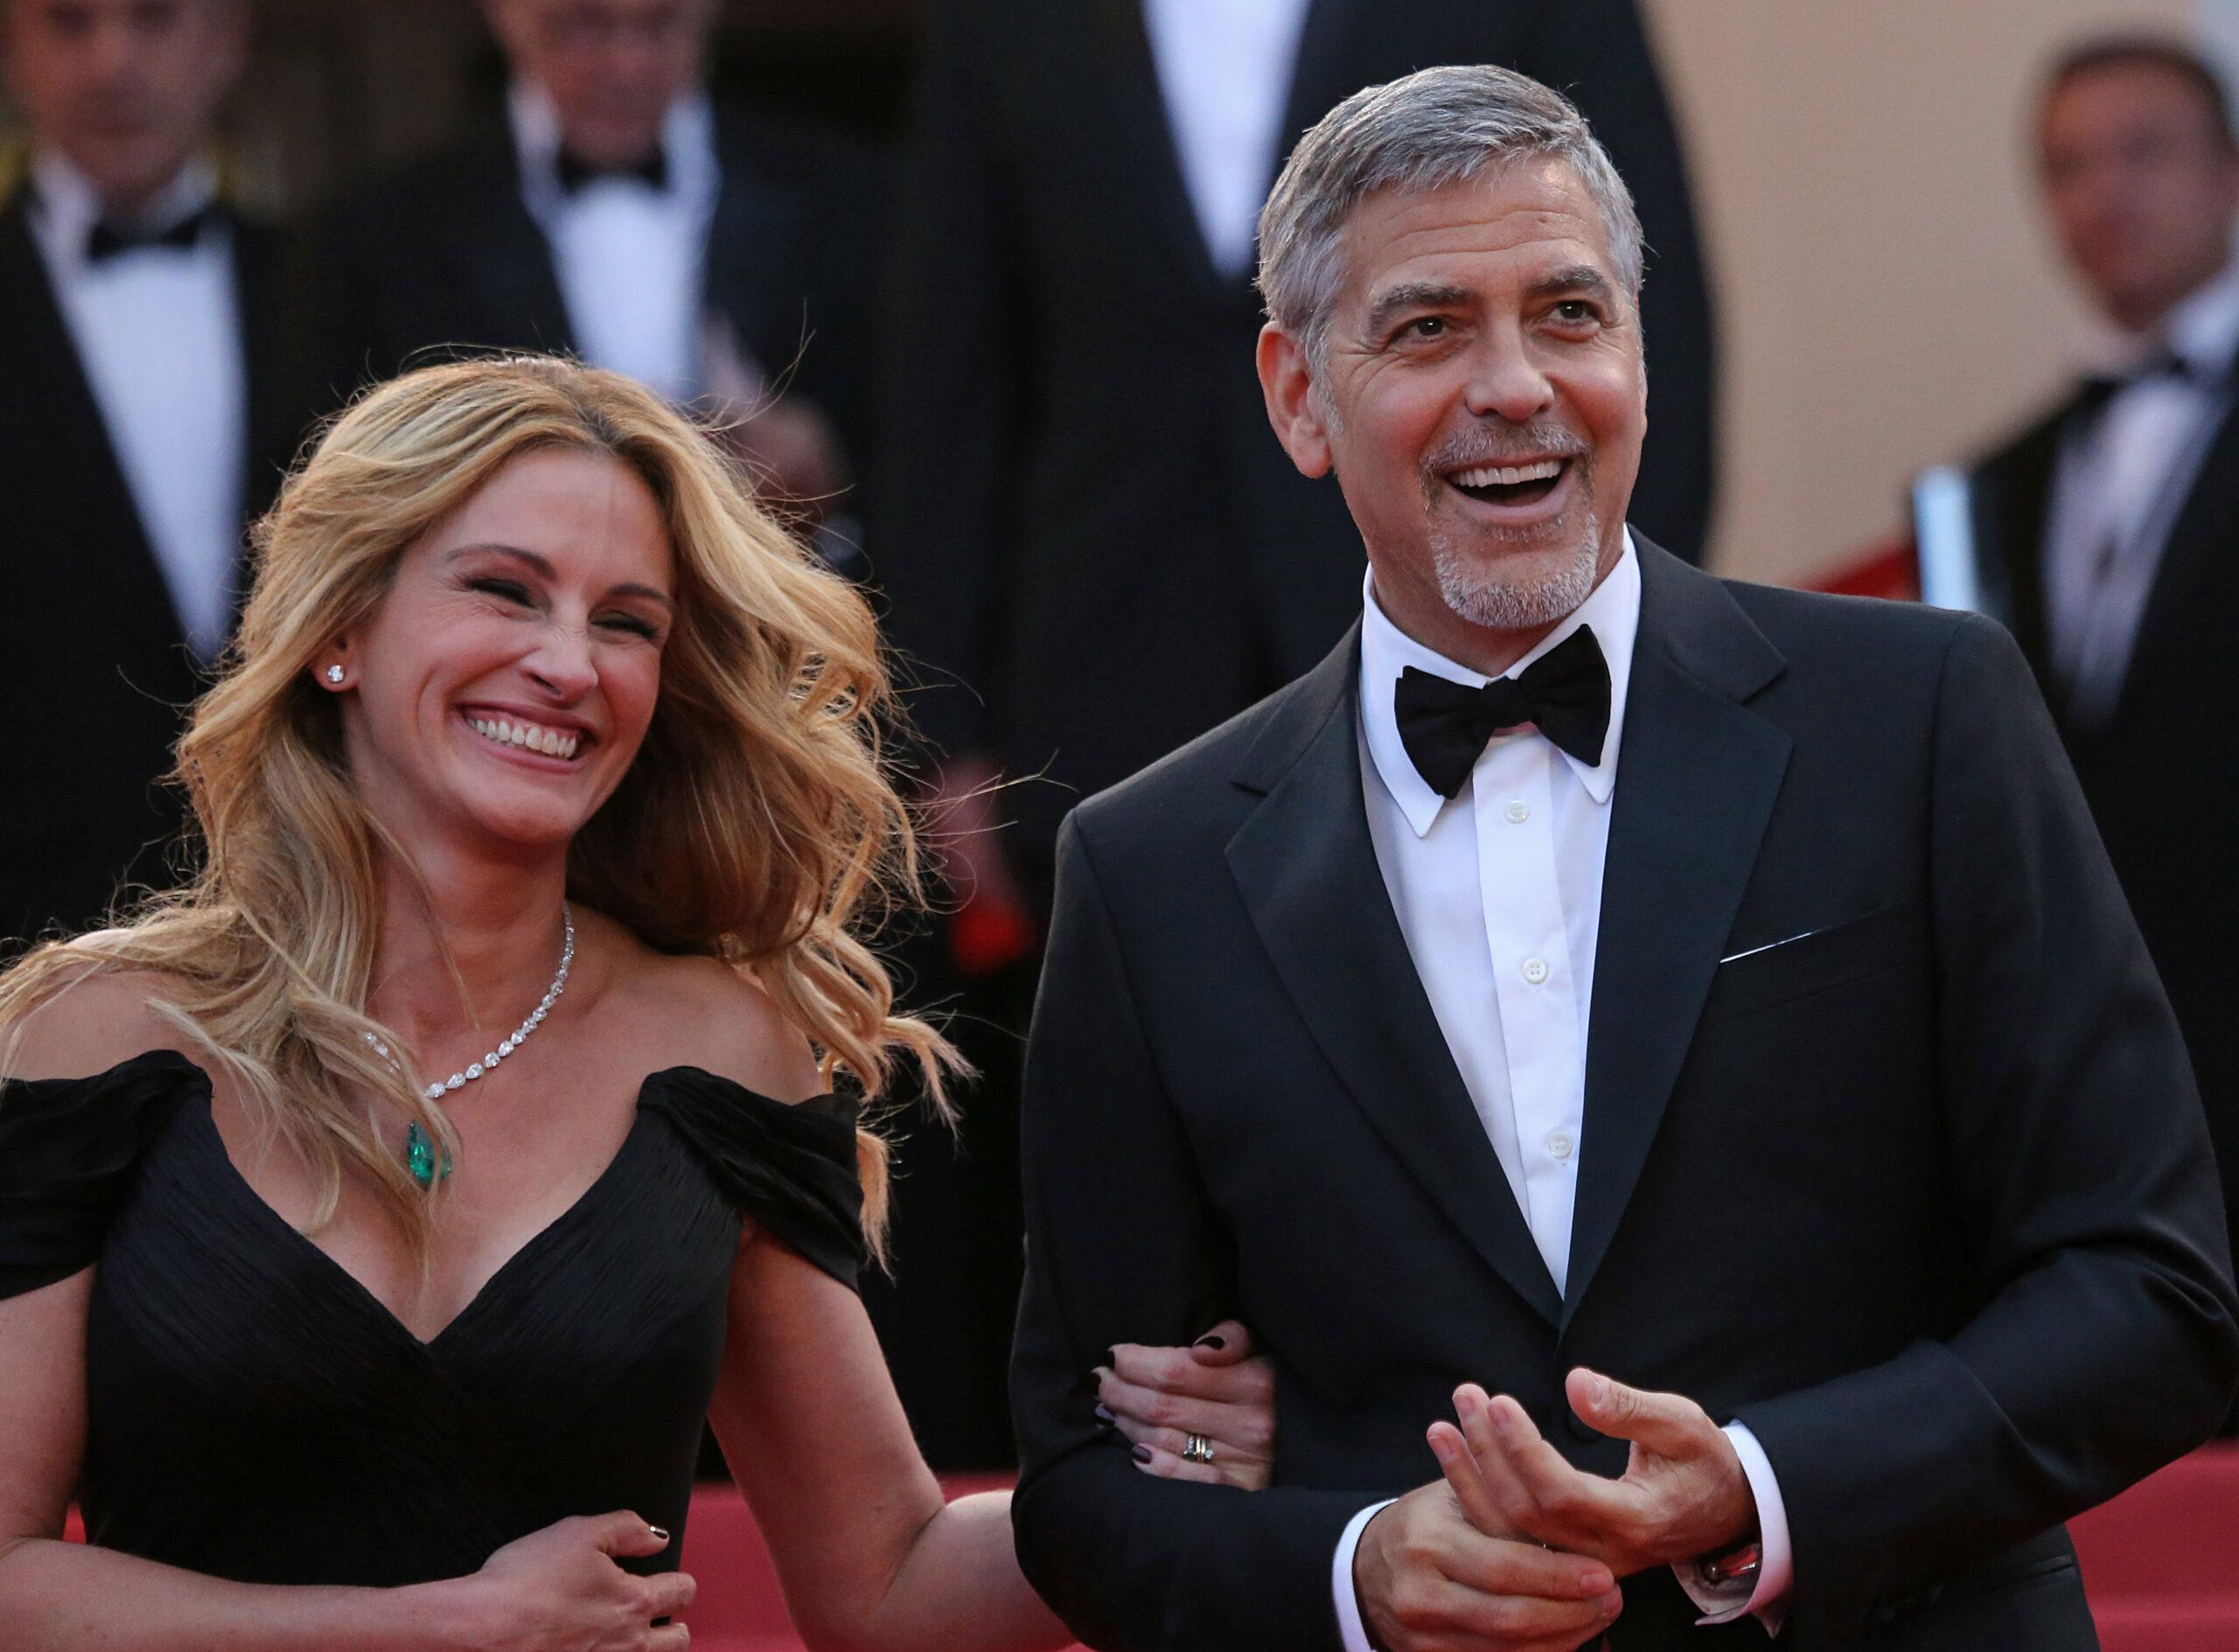 Julia Roberts and George Clooney arrive on the steps of the Palais des Festivals before the screening of the film "Money Monster" during the 69th annual Cannes International Film Festival in Cannes, France on May 12, 2016. 